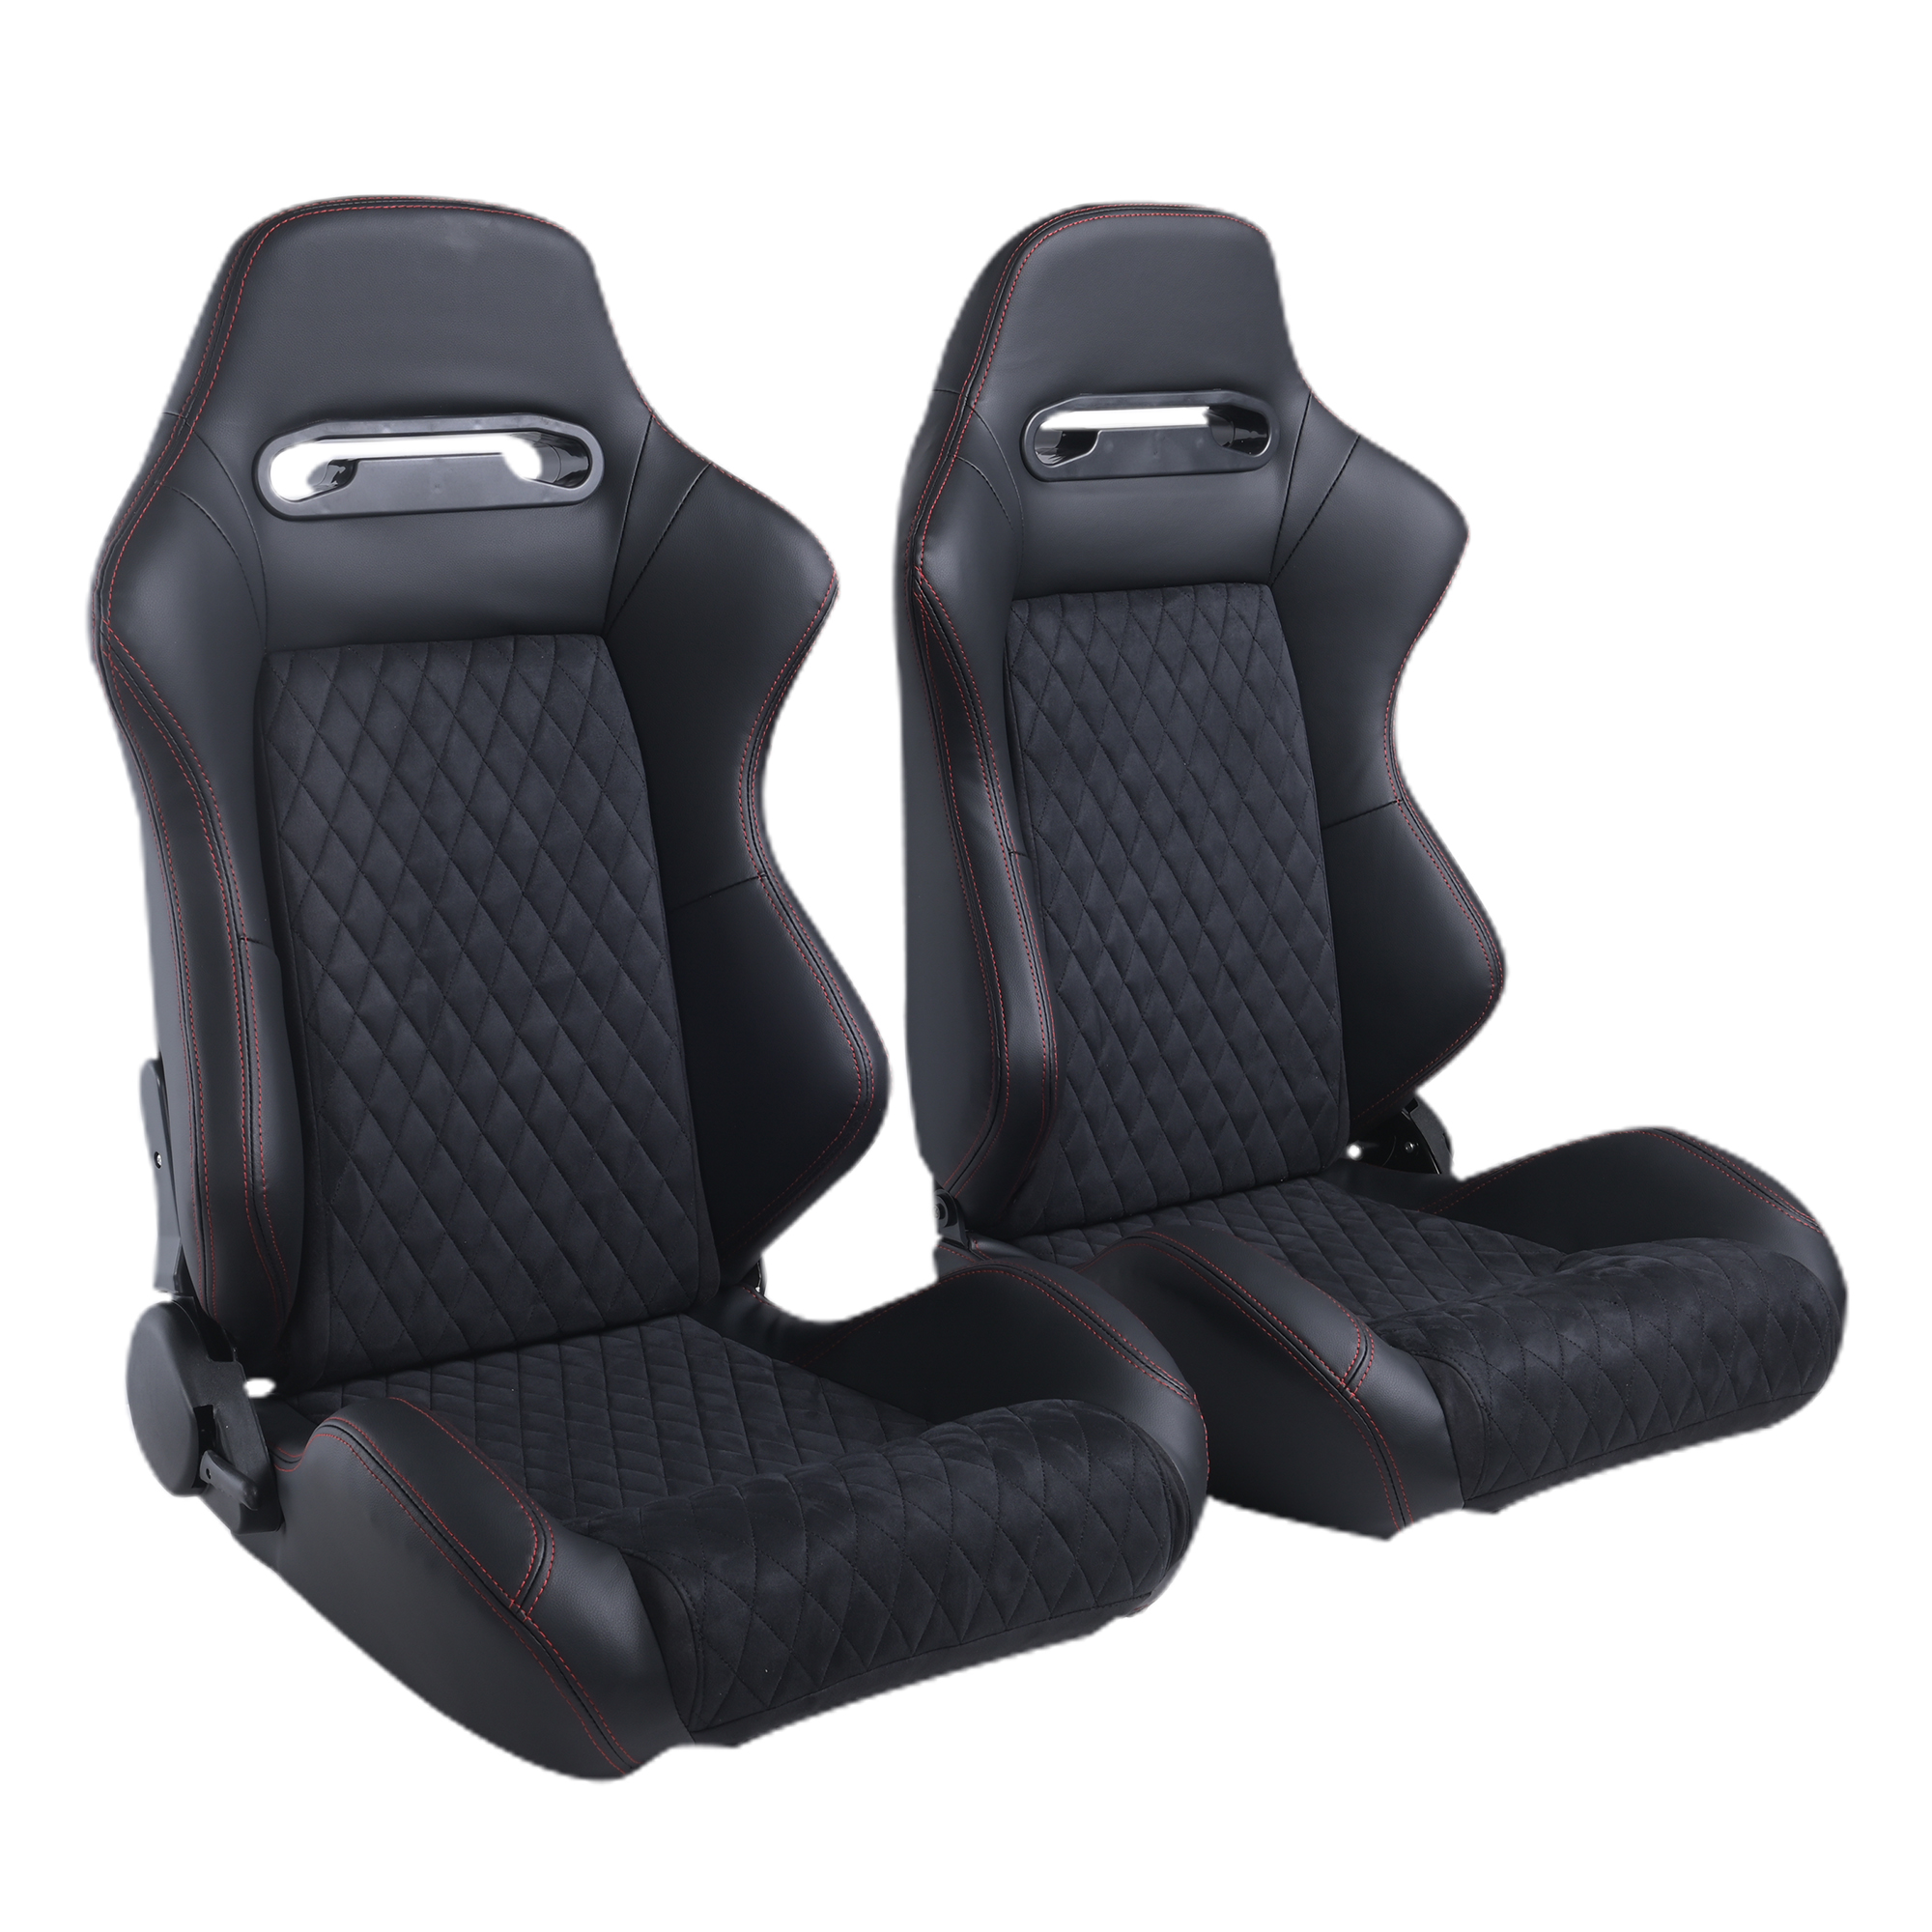 RACING SEAT HIGH QUALITY PVC WITH SUADE MATERIAL DOUBLE SLIDER  2PCS-Boyel Living